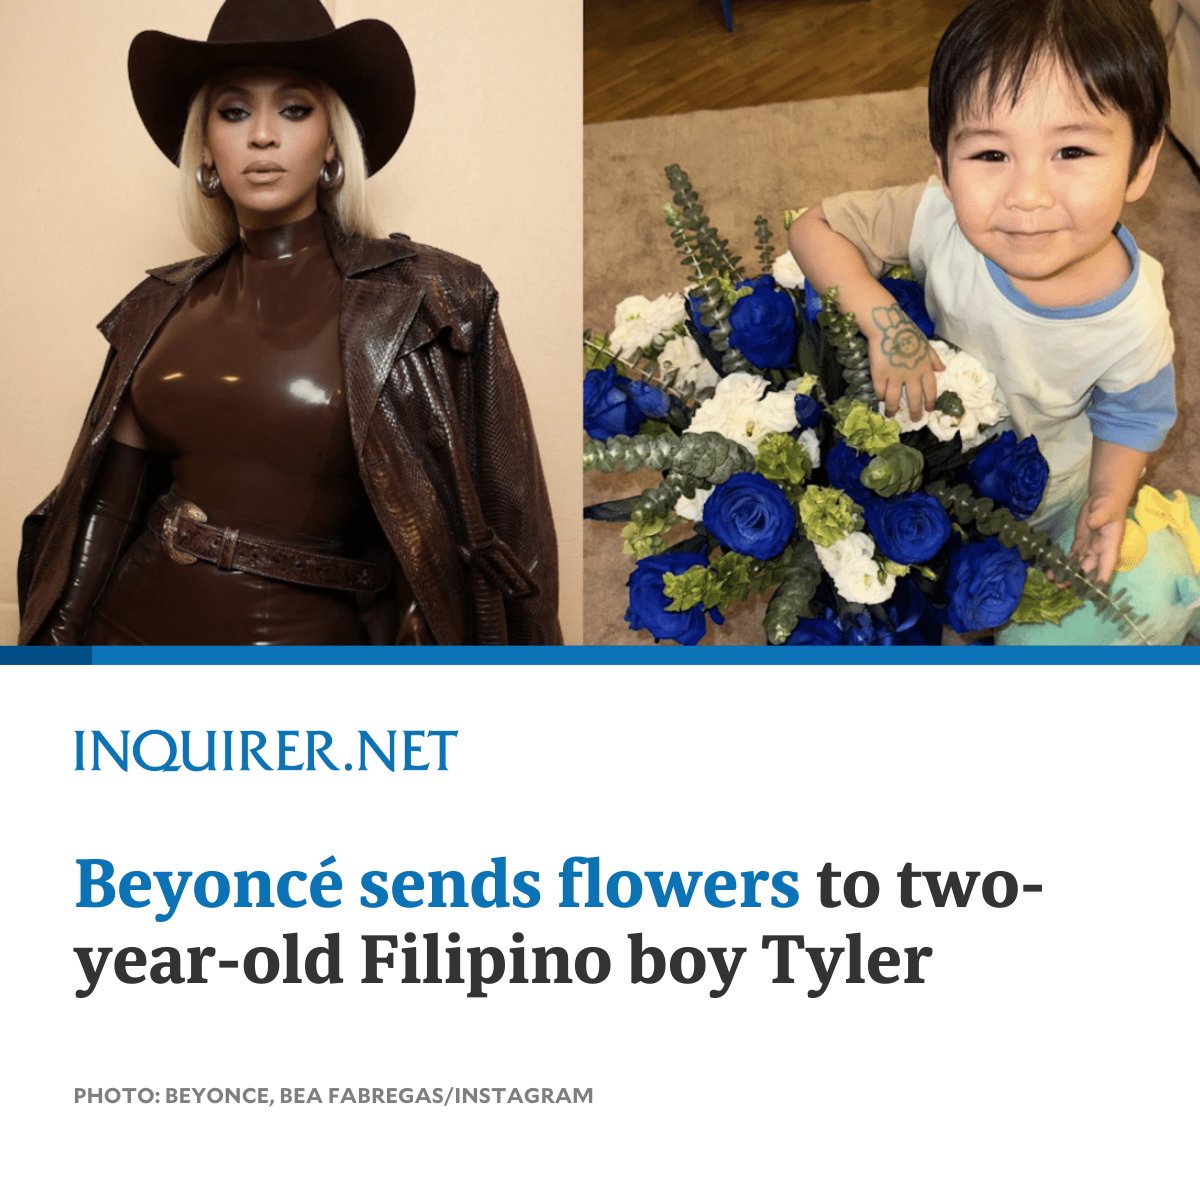 Beyoncé brought warmth to the internet after she sent flowers, a toy, and a sweet note to sports broadcasters Bea Fabregas and Nikko Ramos’ two-year-old son, Tyler, who went viral for his video asking where the American singer is as he wants to meet her because they’re “friends.”